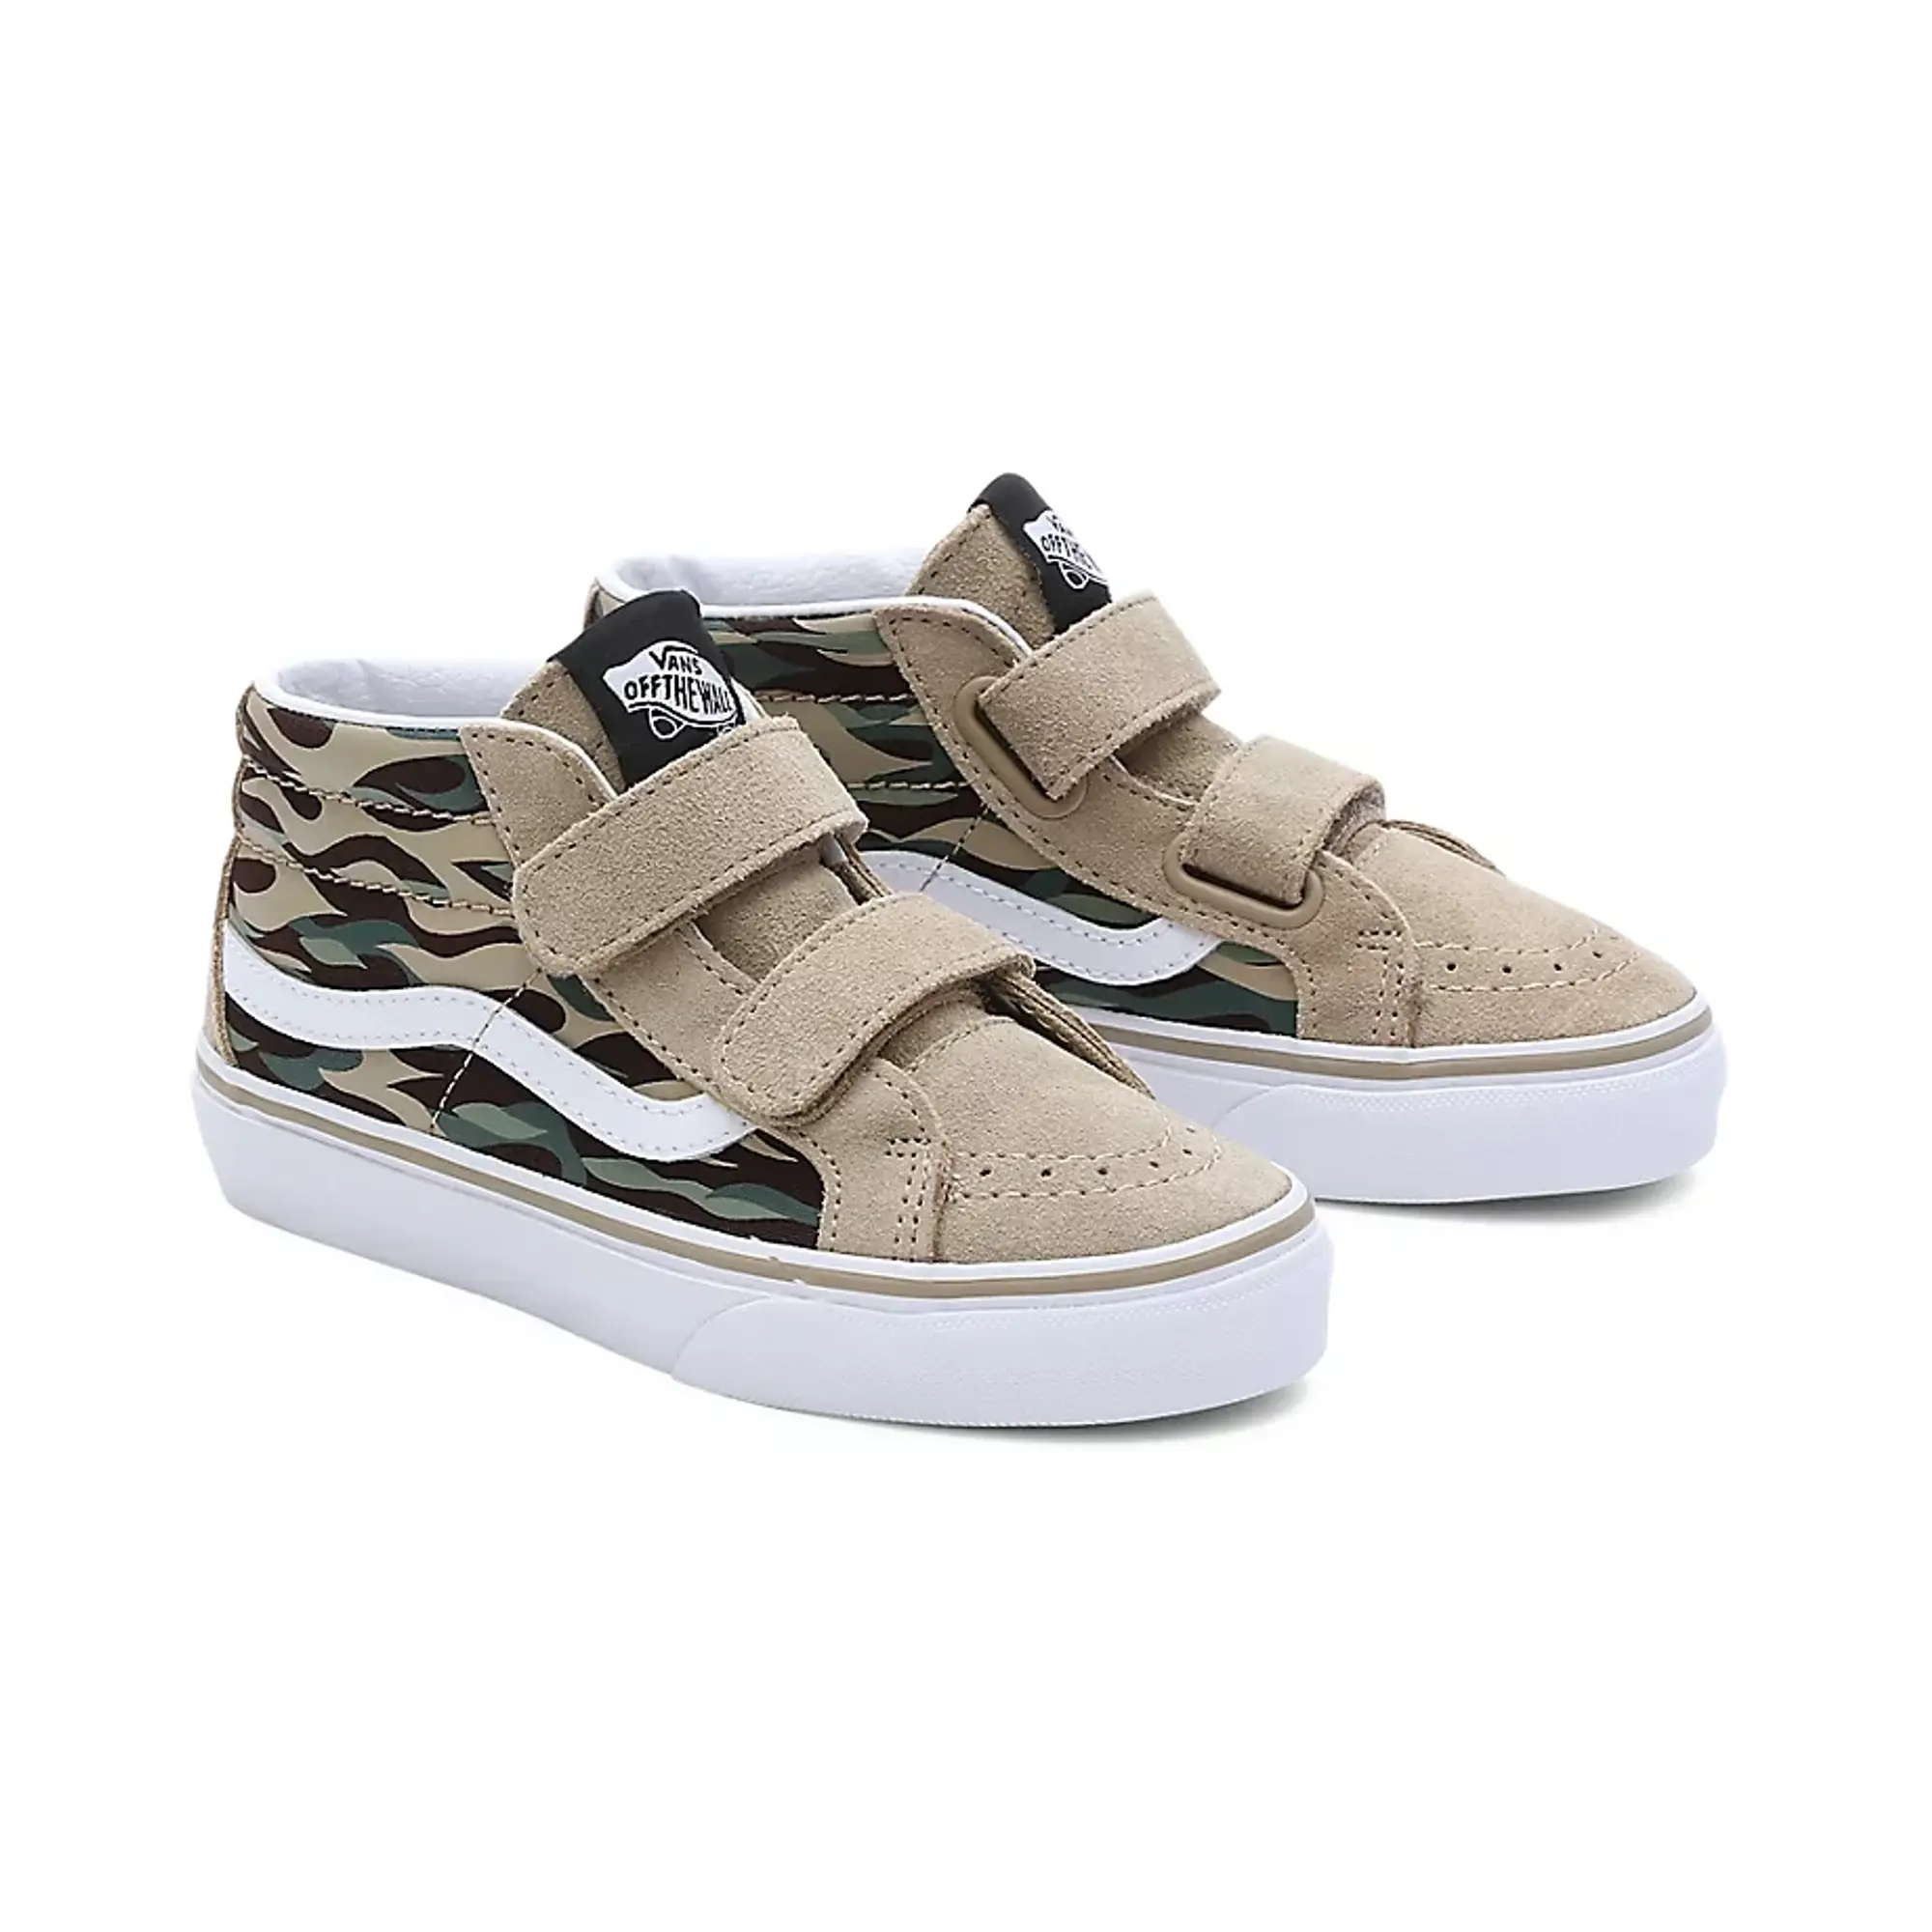 Vans Sk8-mid Reissue Flame Camo Velcro Younger Trainers - Light Brown, Light Brown